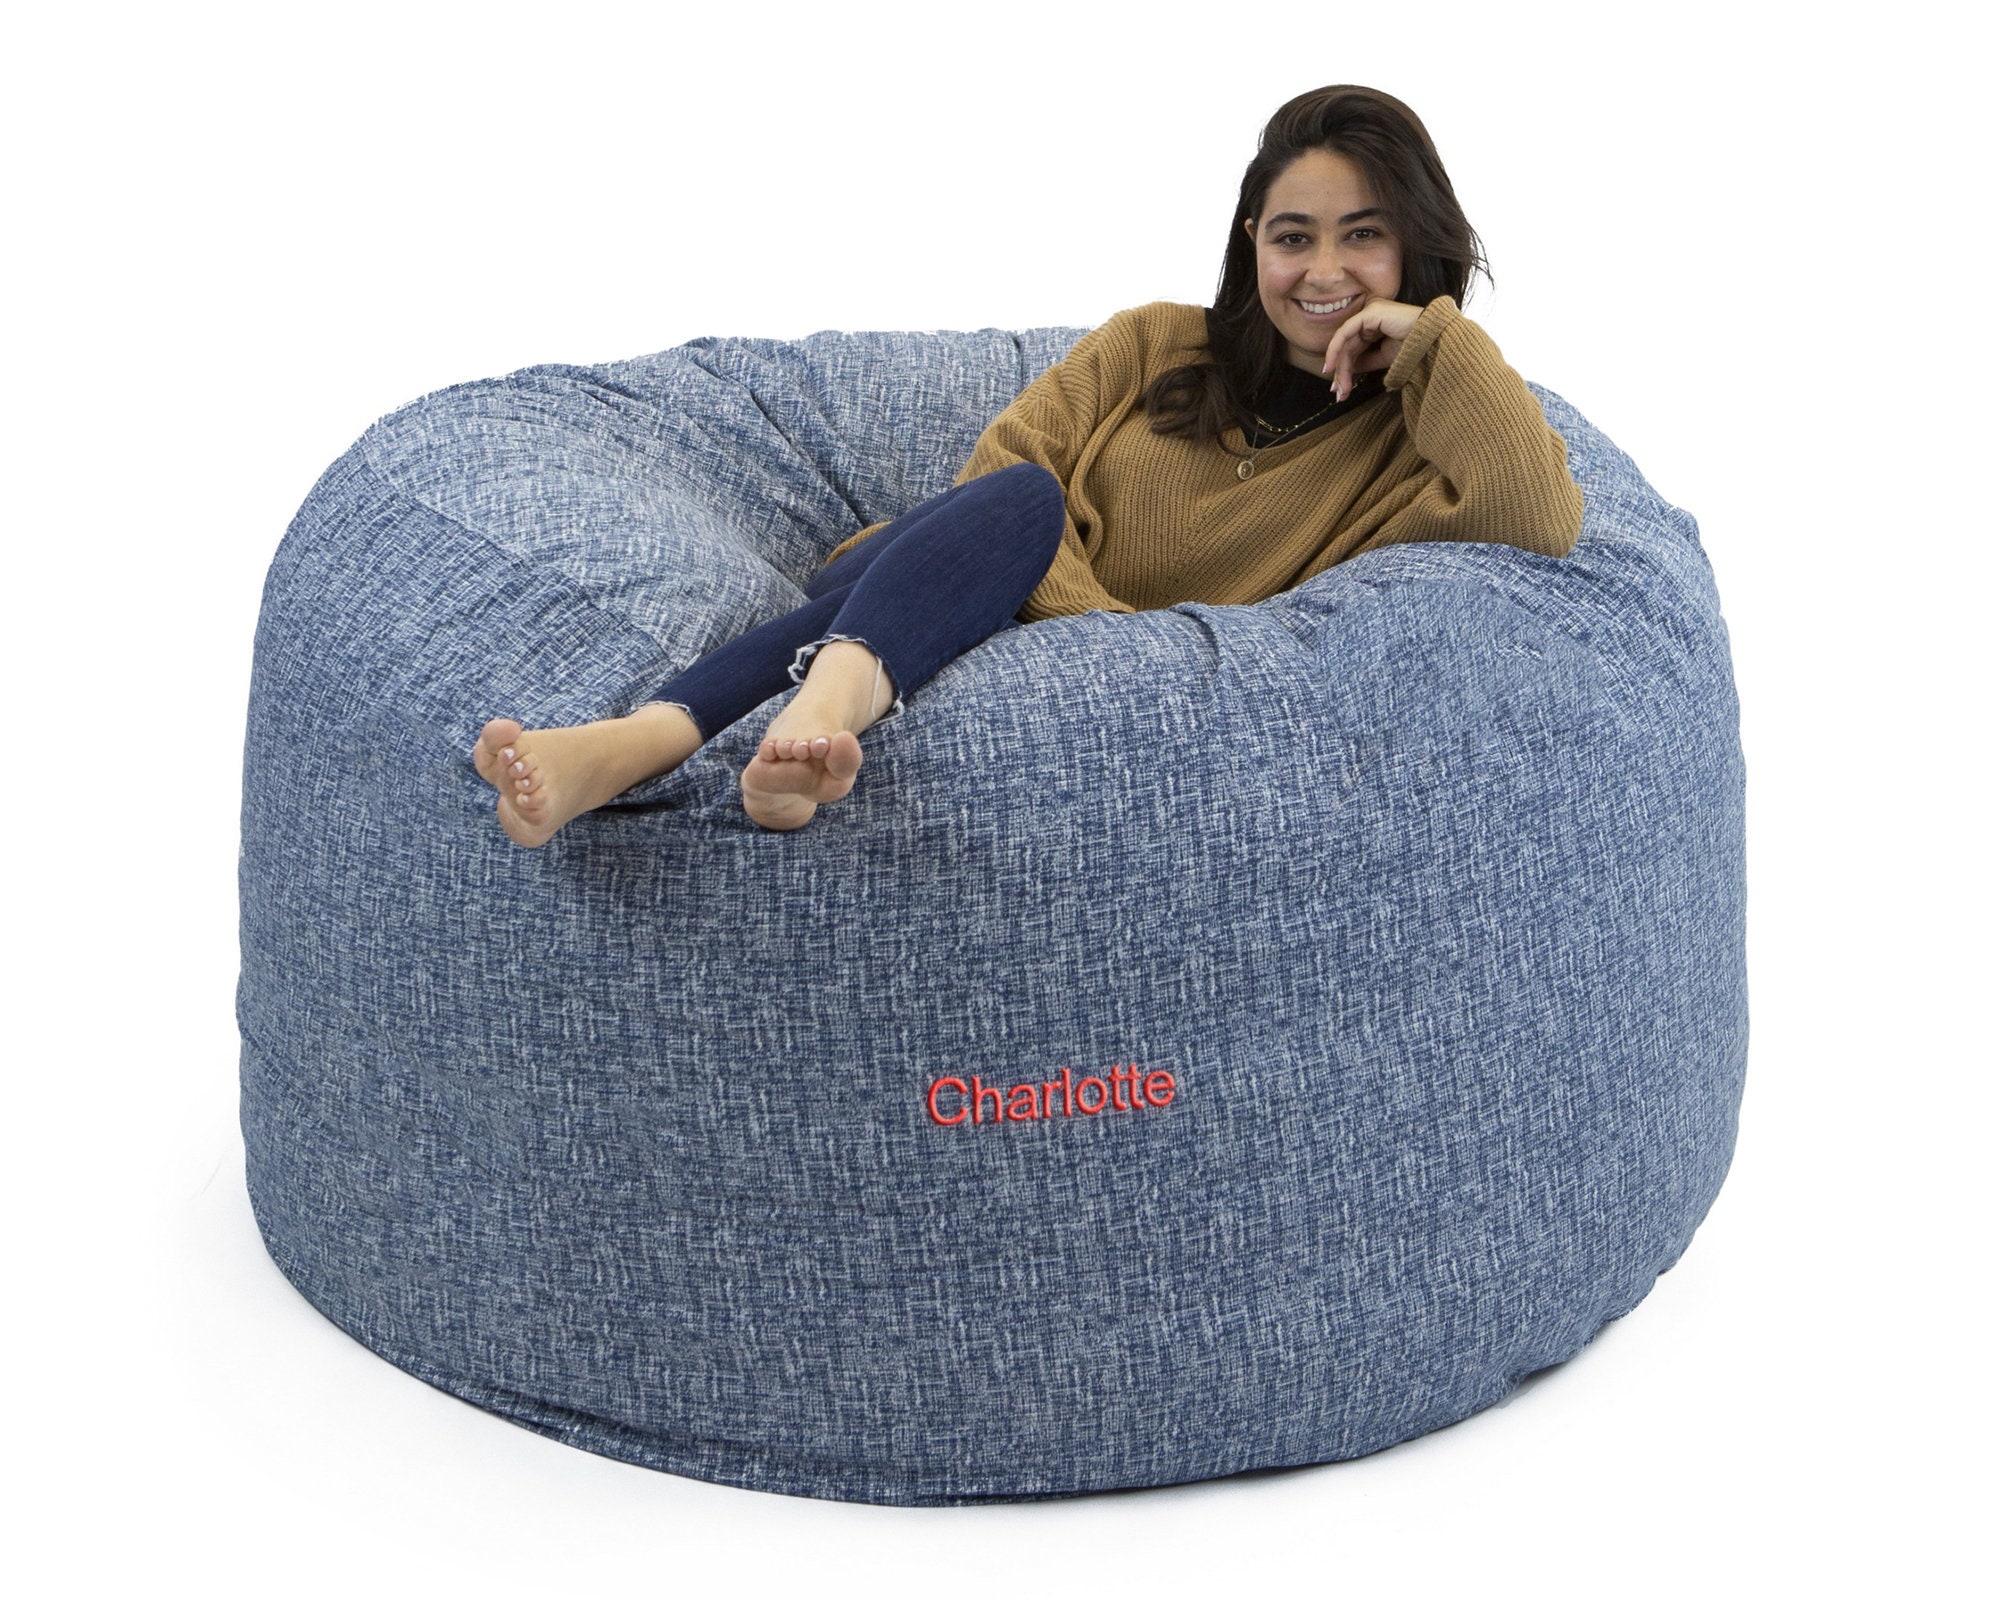 Add-on Bean Bag Filler for Looping Home Bean Bag Covers, Recycled  Polystyrene Beads, Not Sold Individually Only as an Add-on to My Bean Bags  